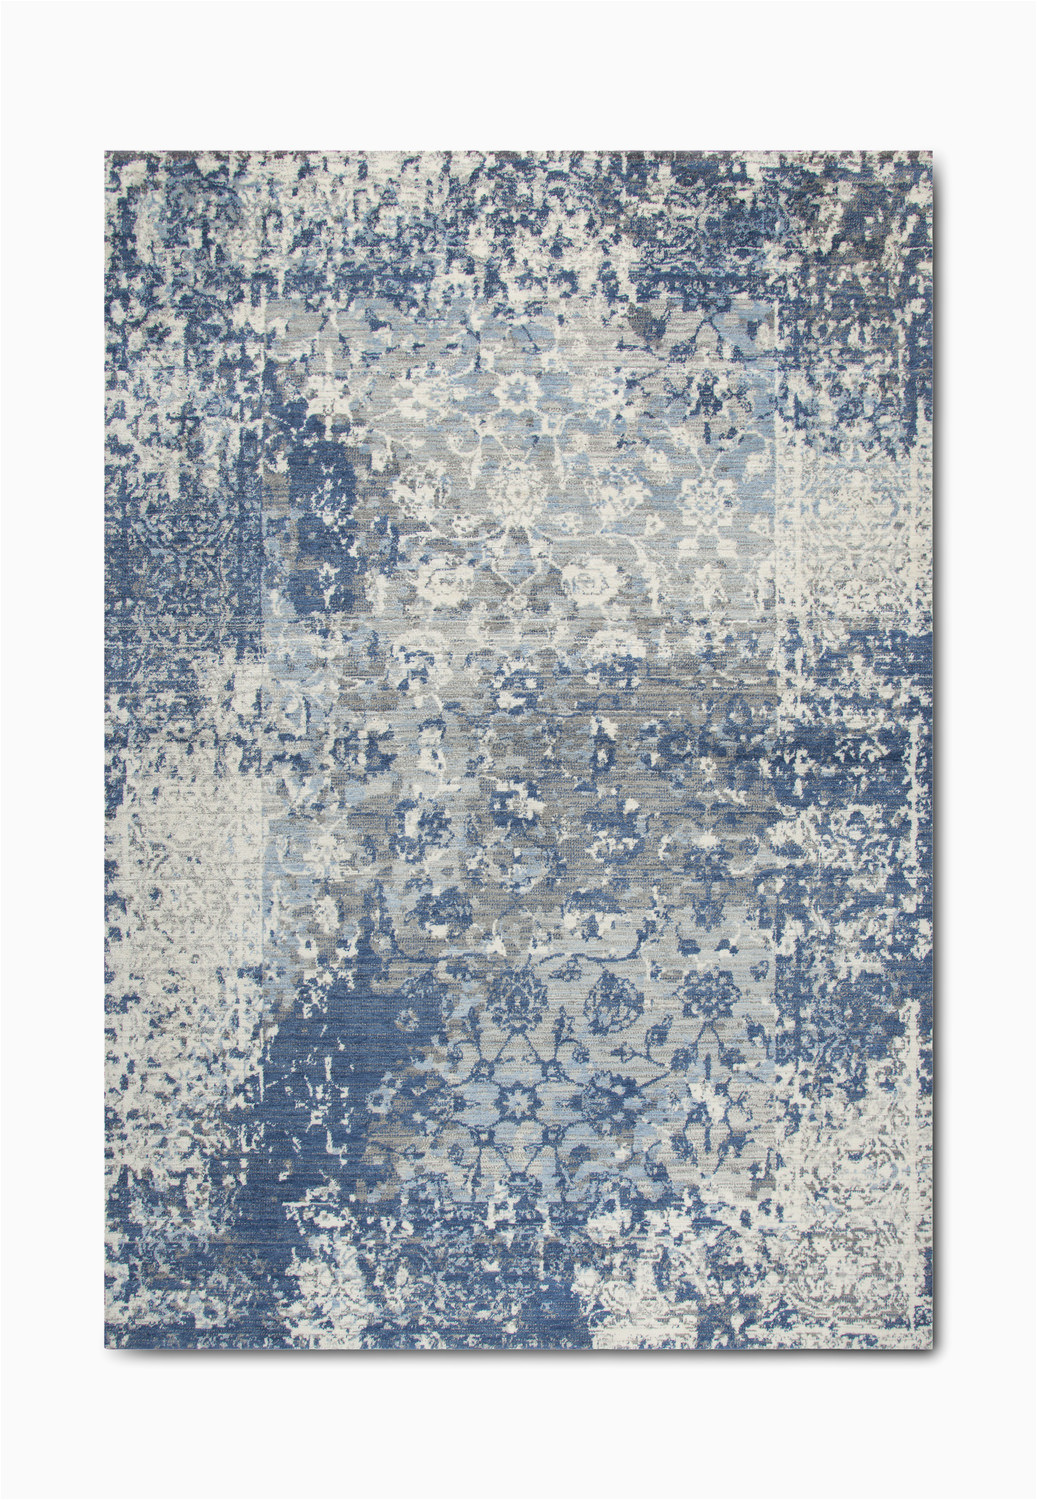 Blue and Gray Throw Rugs Gossamer Blue Grey area Rug